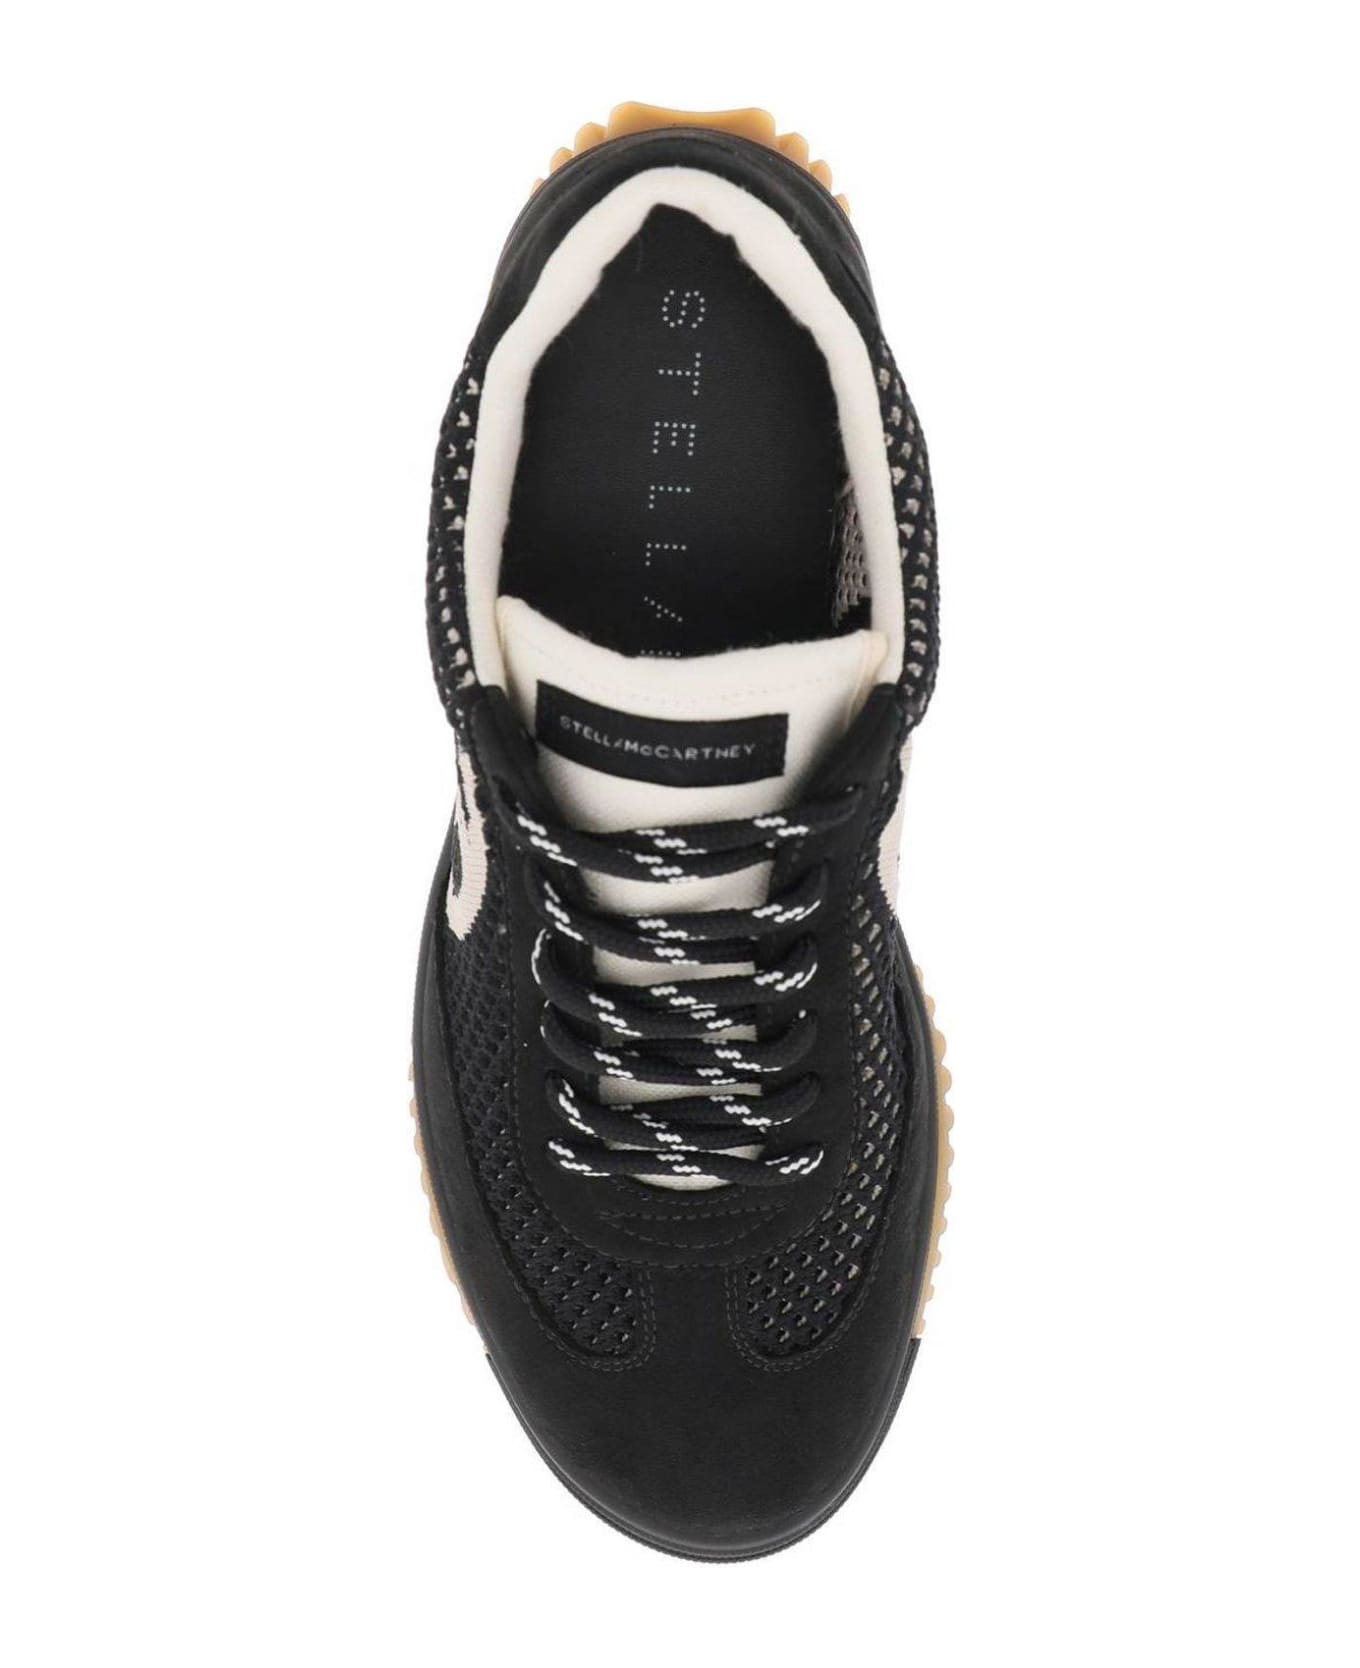 Stella McCartney S Wave Lace-up Sneakers - Black